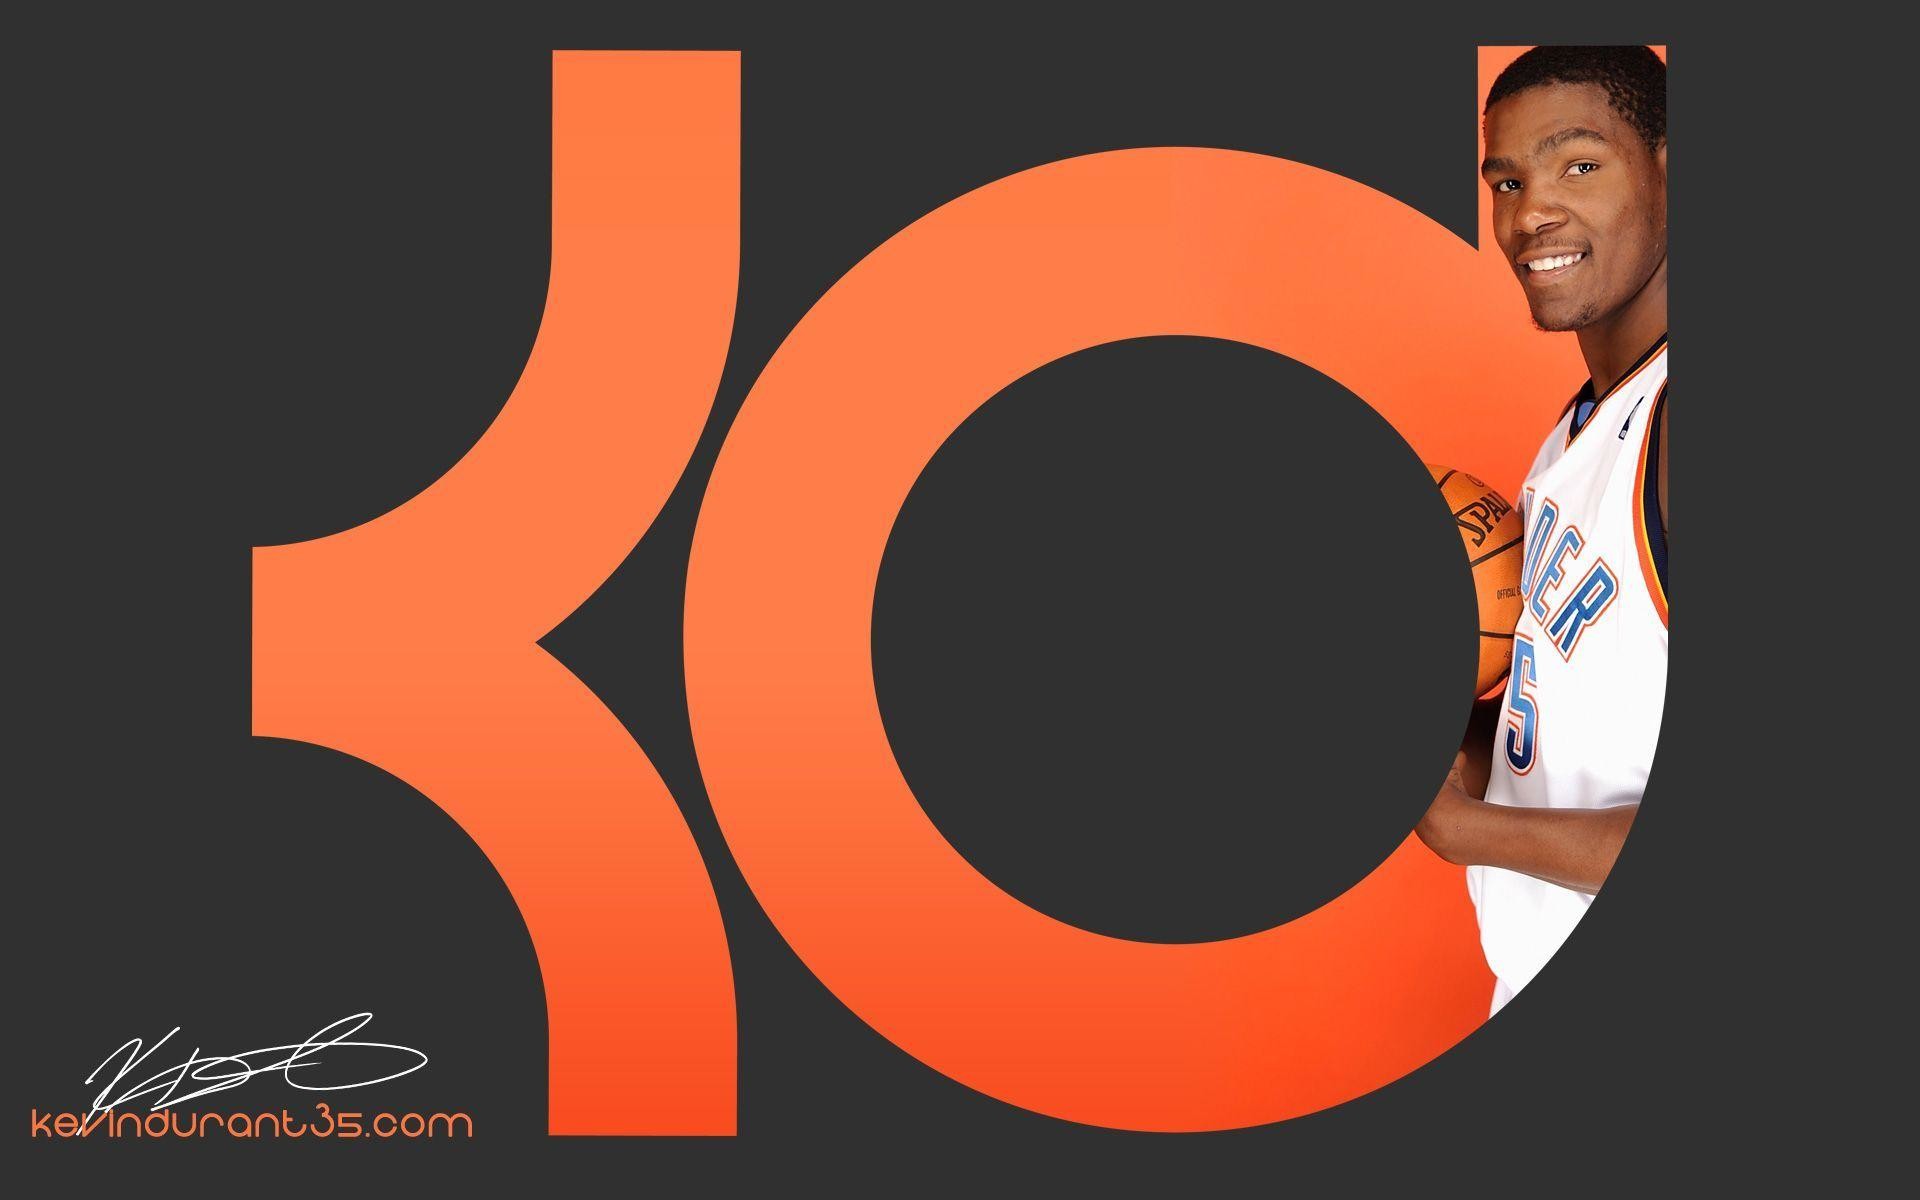 1920x1200 Kevin Durant Wallpapers 2015 HD - Wallpaper Cave